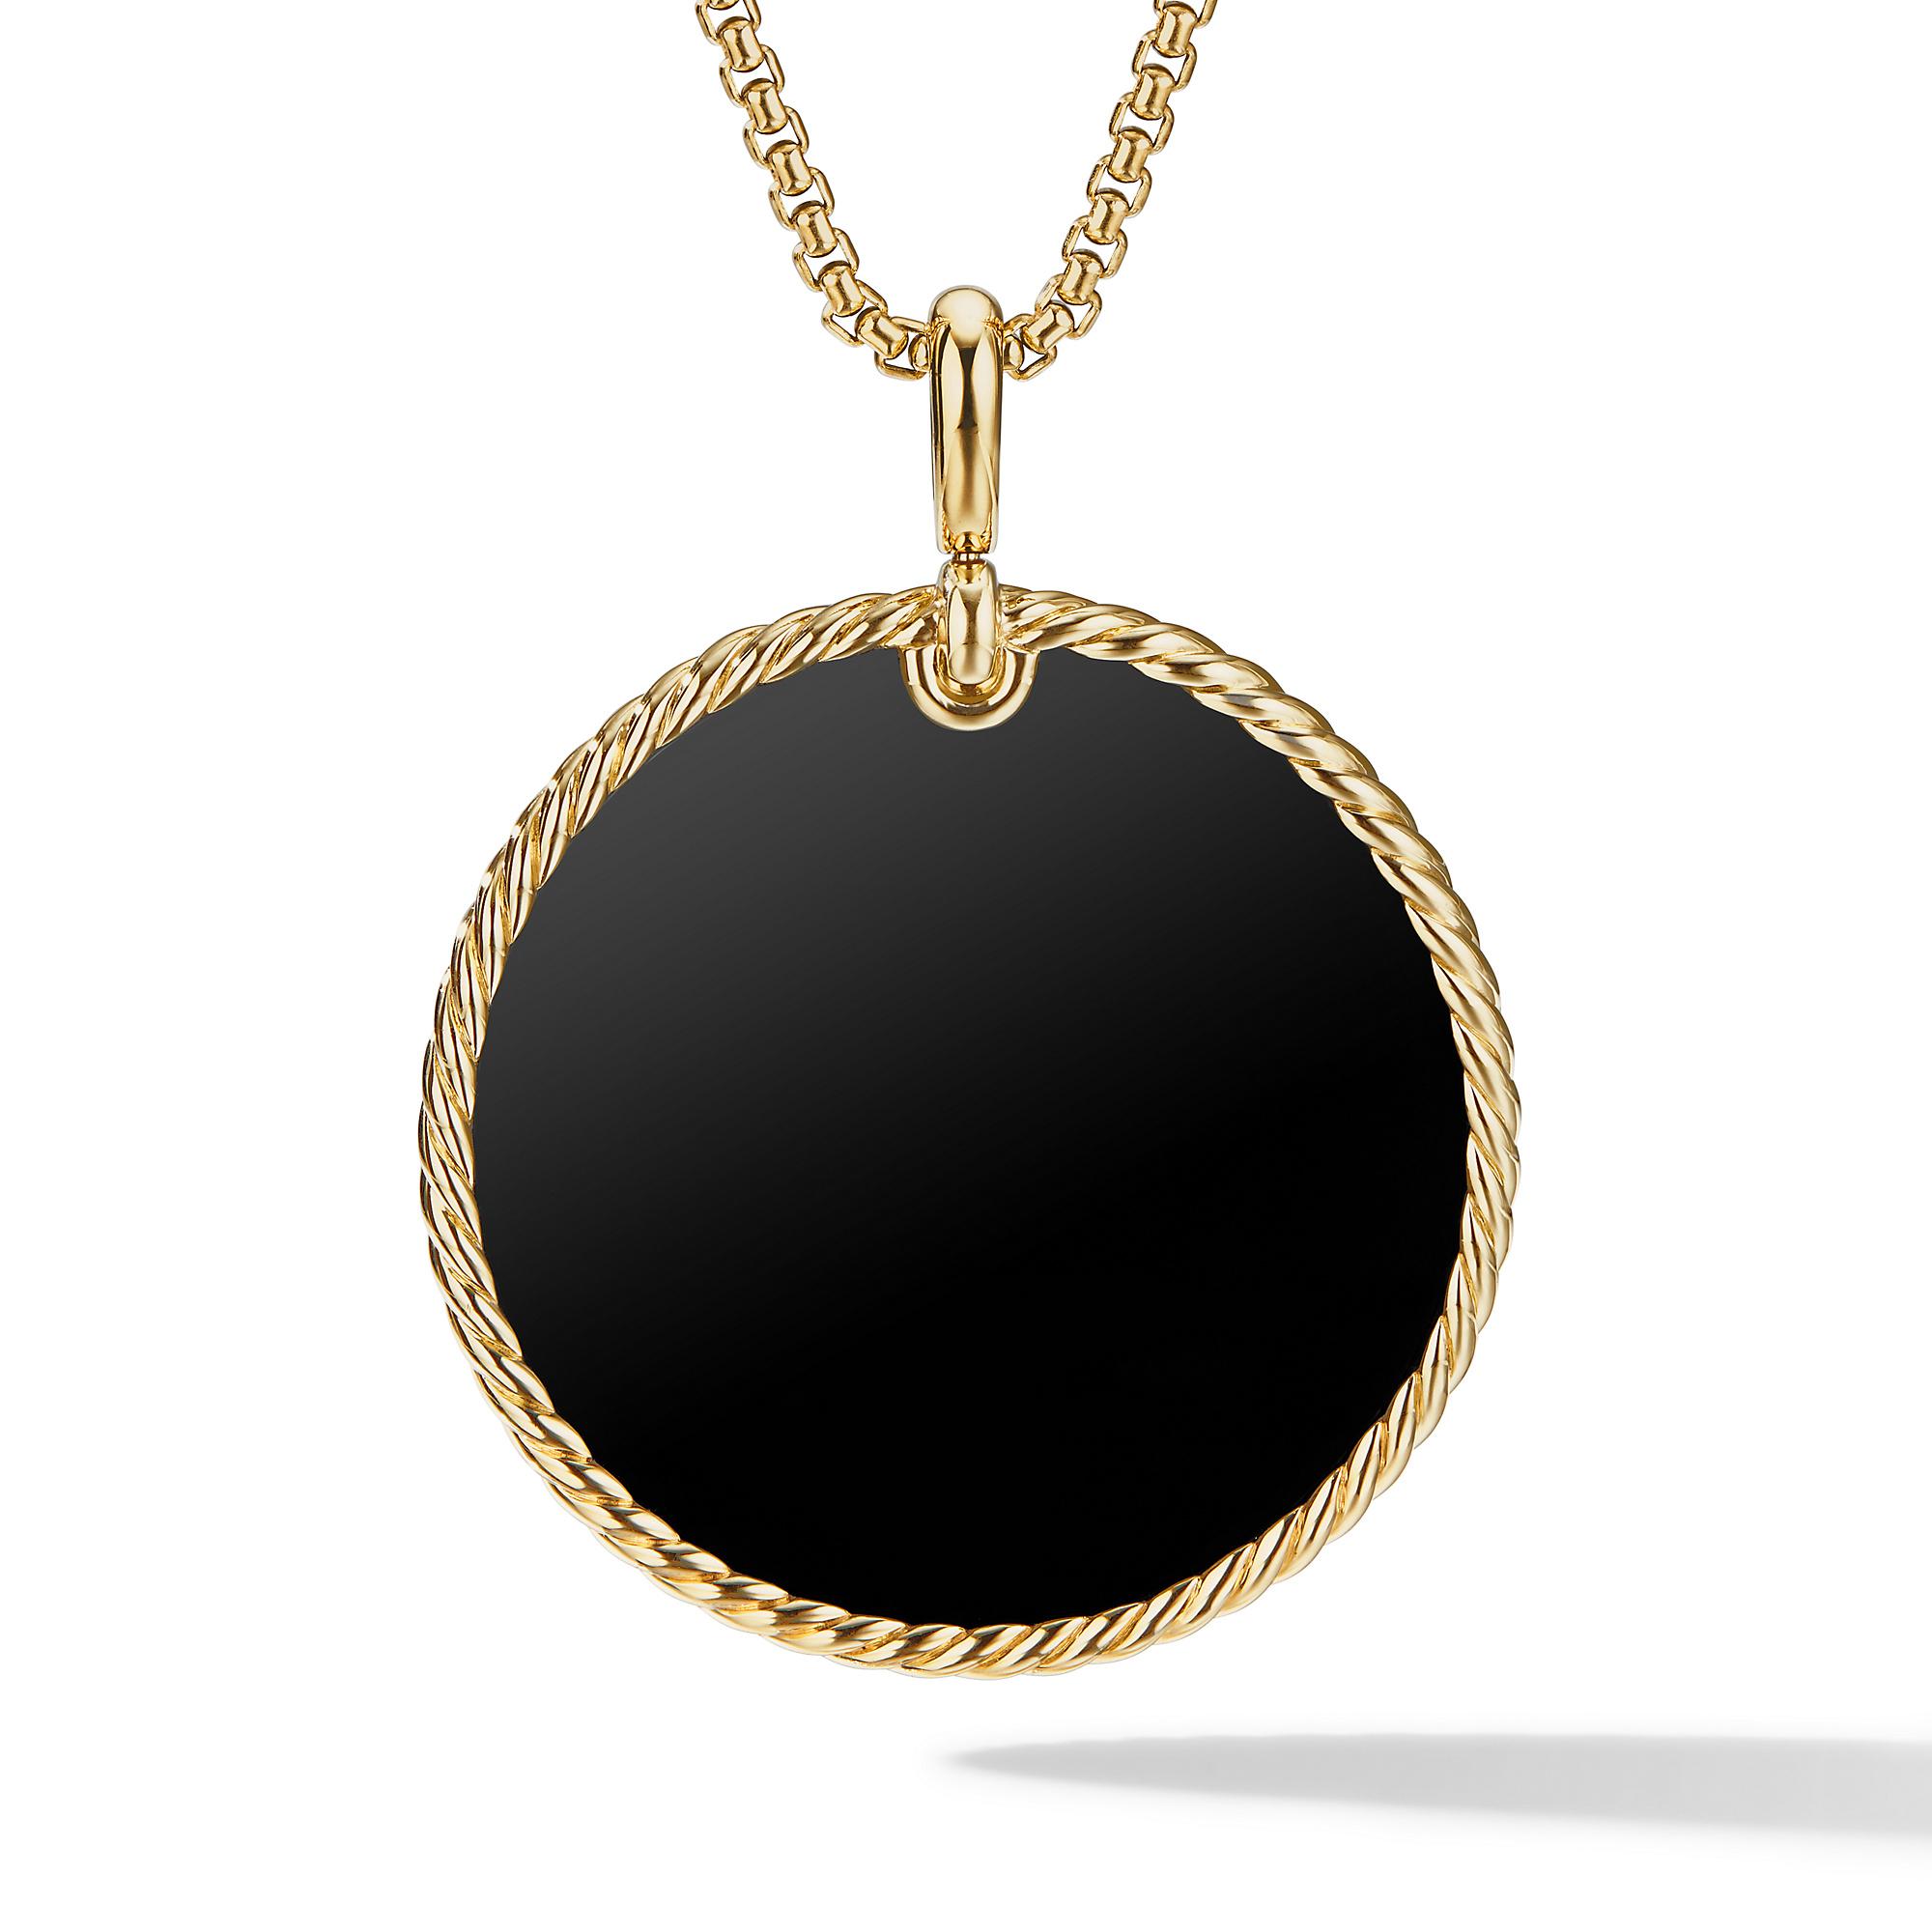 David Yurman DY Elements  Reversible Disc Pendant in 18K Yellow Gold with Black Onyx and Mother of Pearl